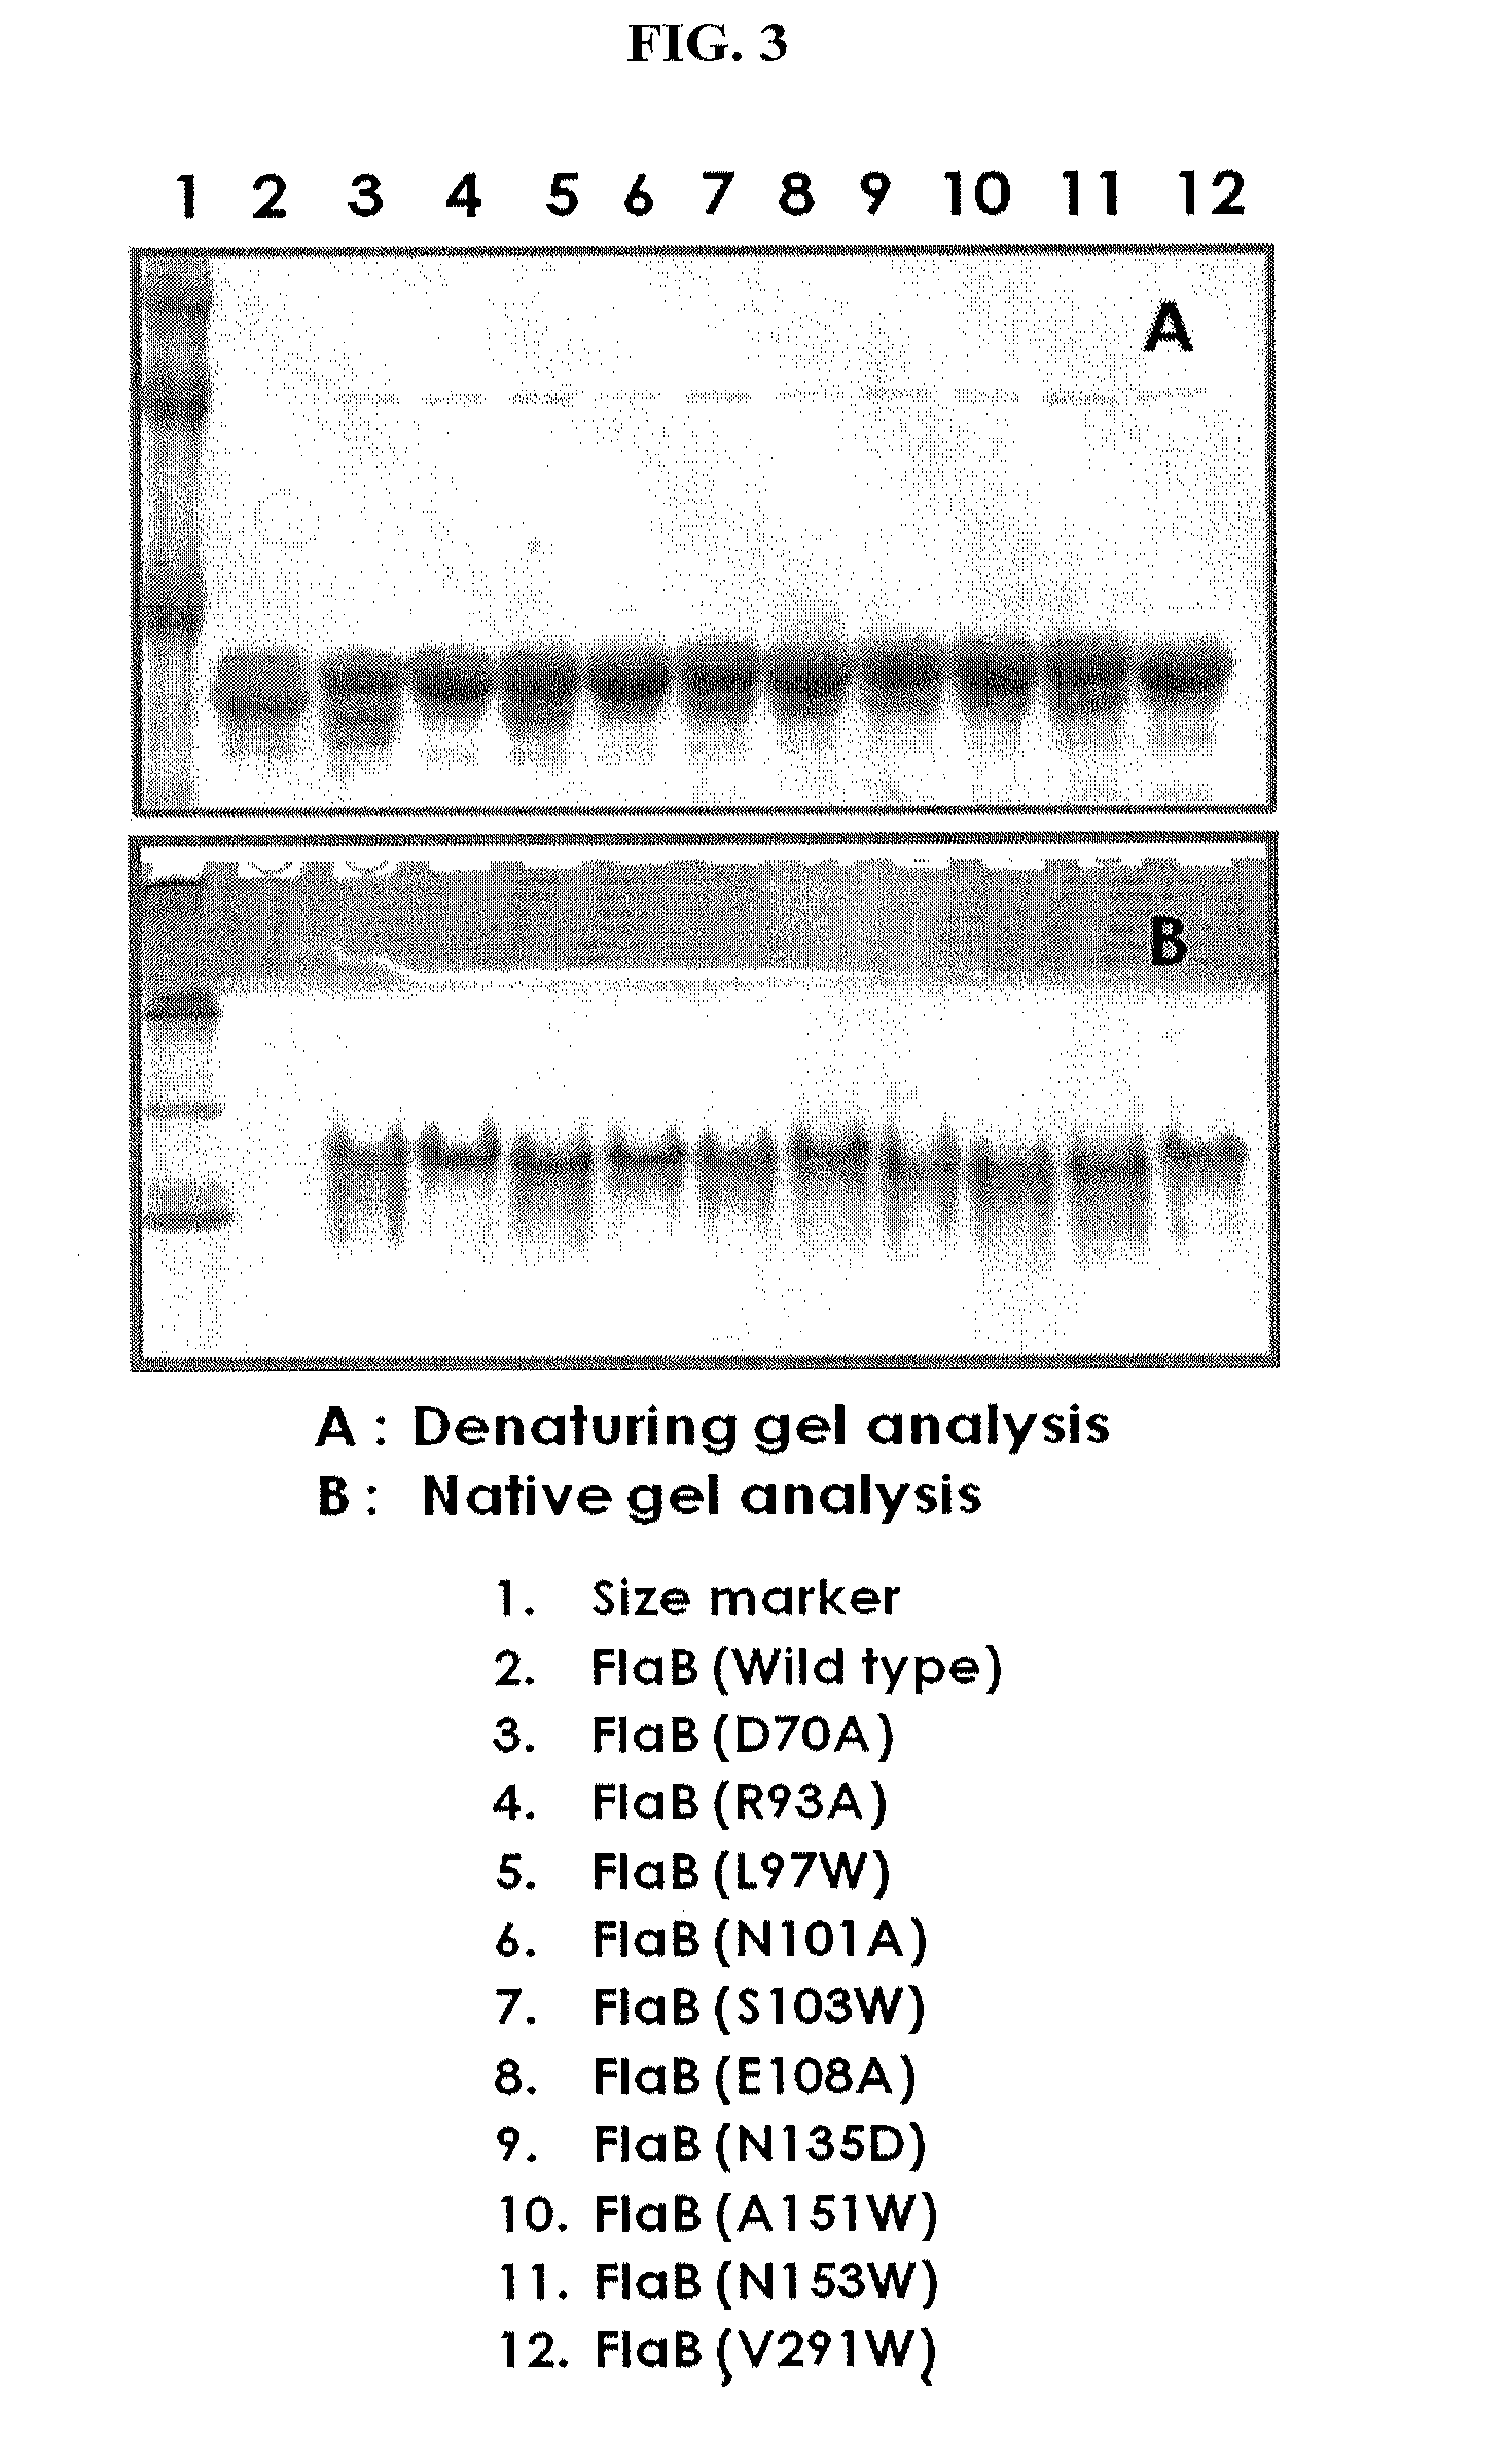 Modified flagellin improved toll-like receptor 5 stimulating activity